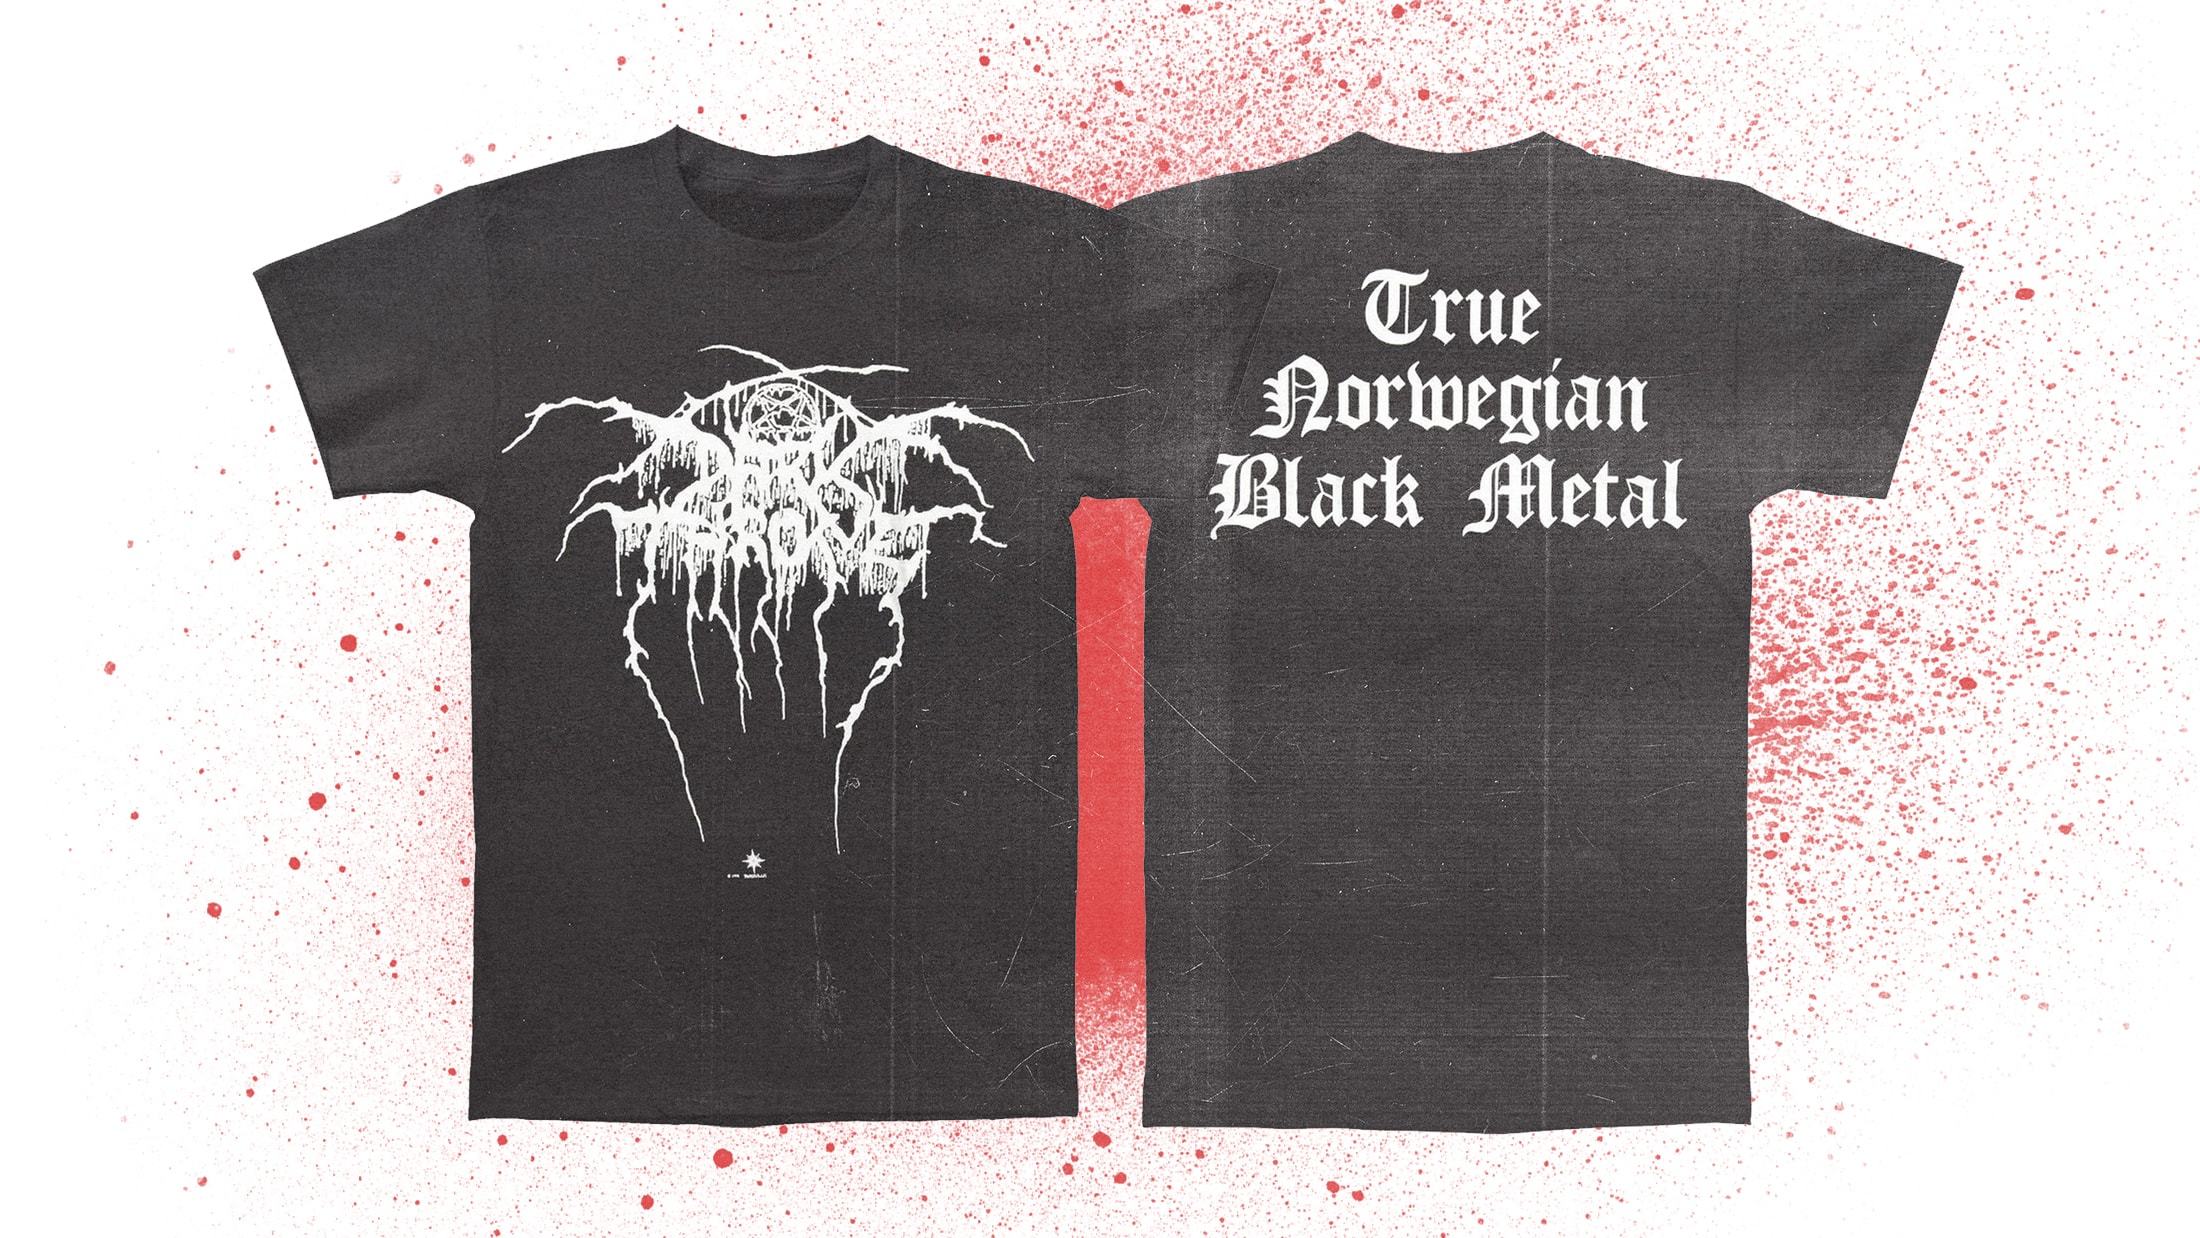 shilling stimulere afvisning The 13 Best Heavy Metal T-Shirts Of All-Time – Ranked | Kerrang!